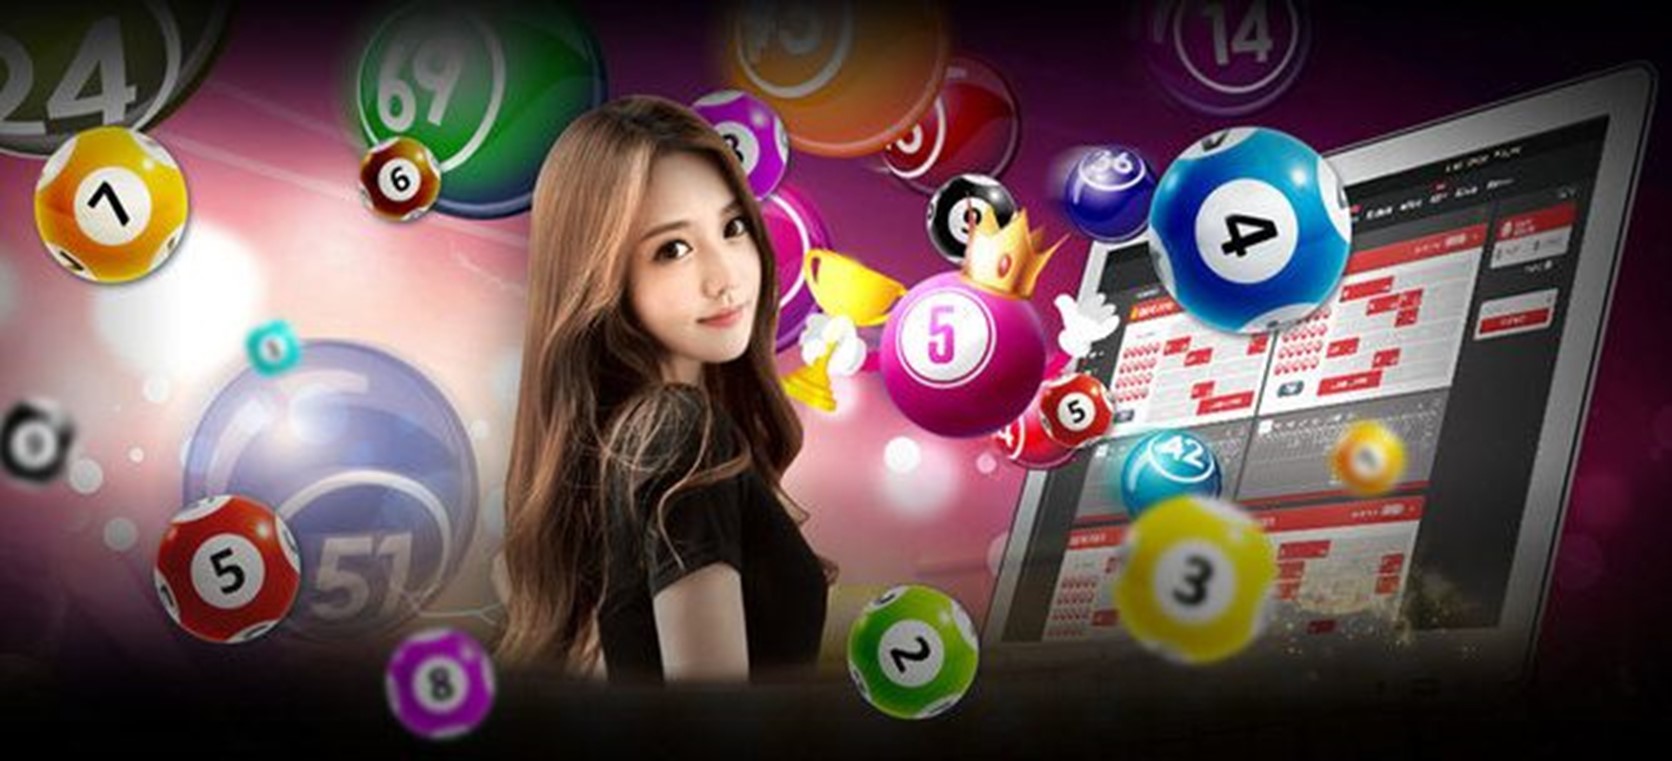 Play Live Casino Game Online in Singapore